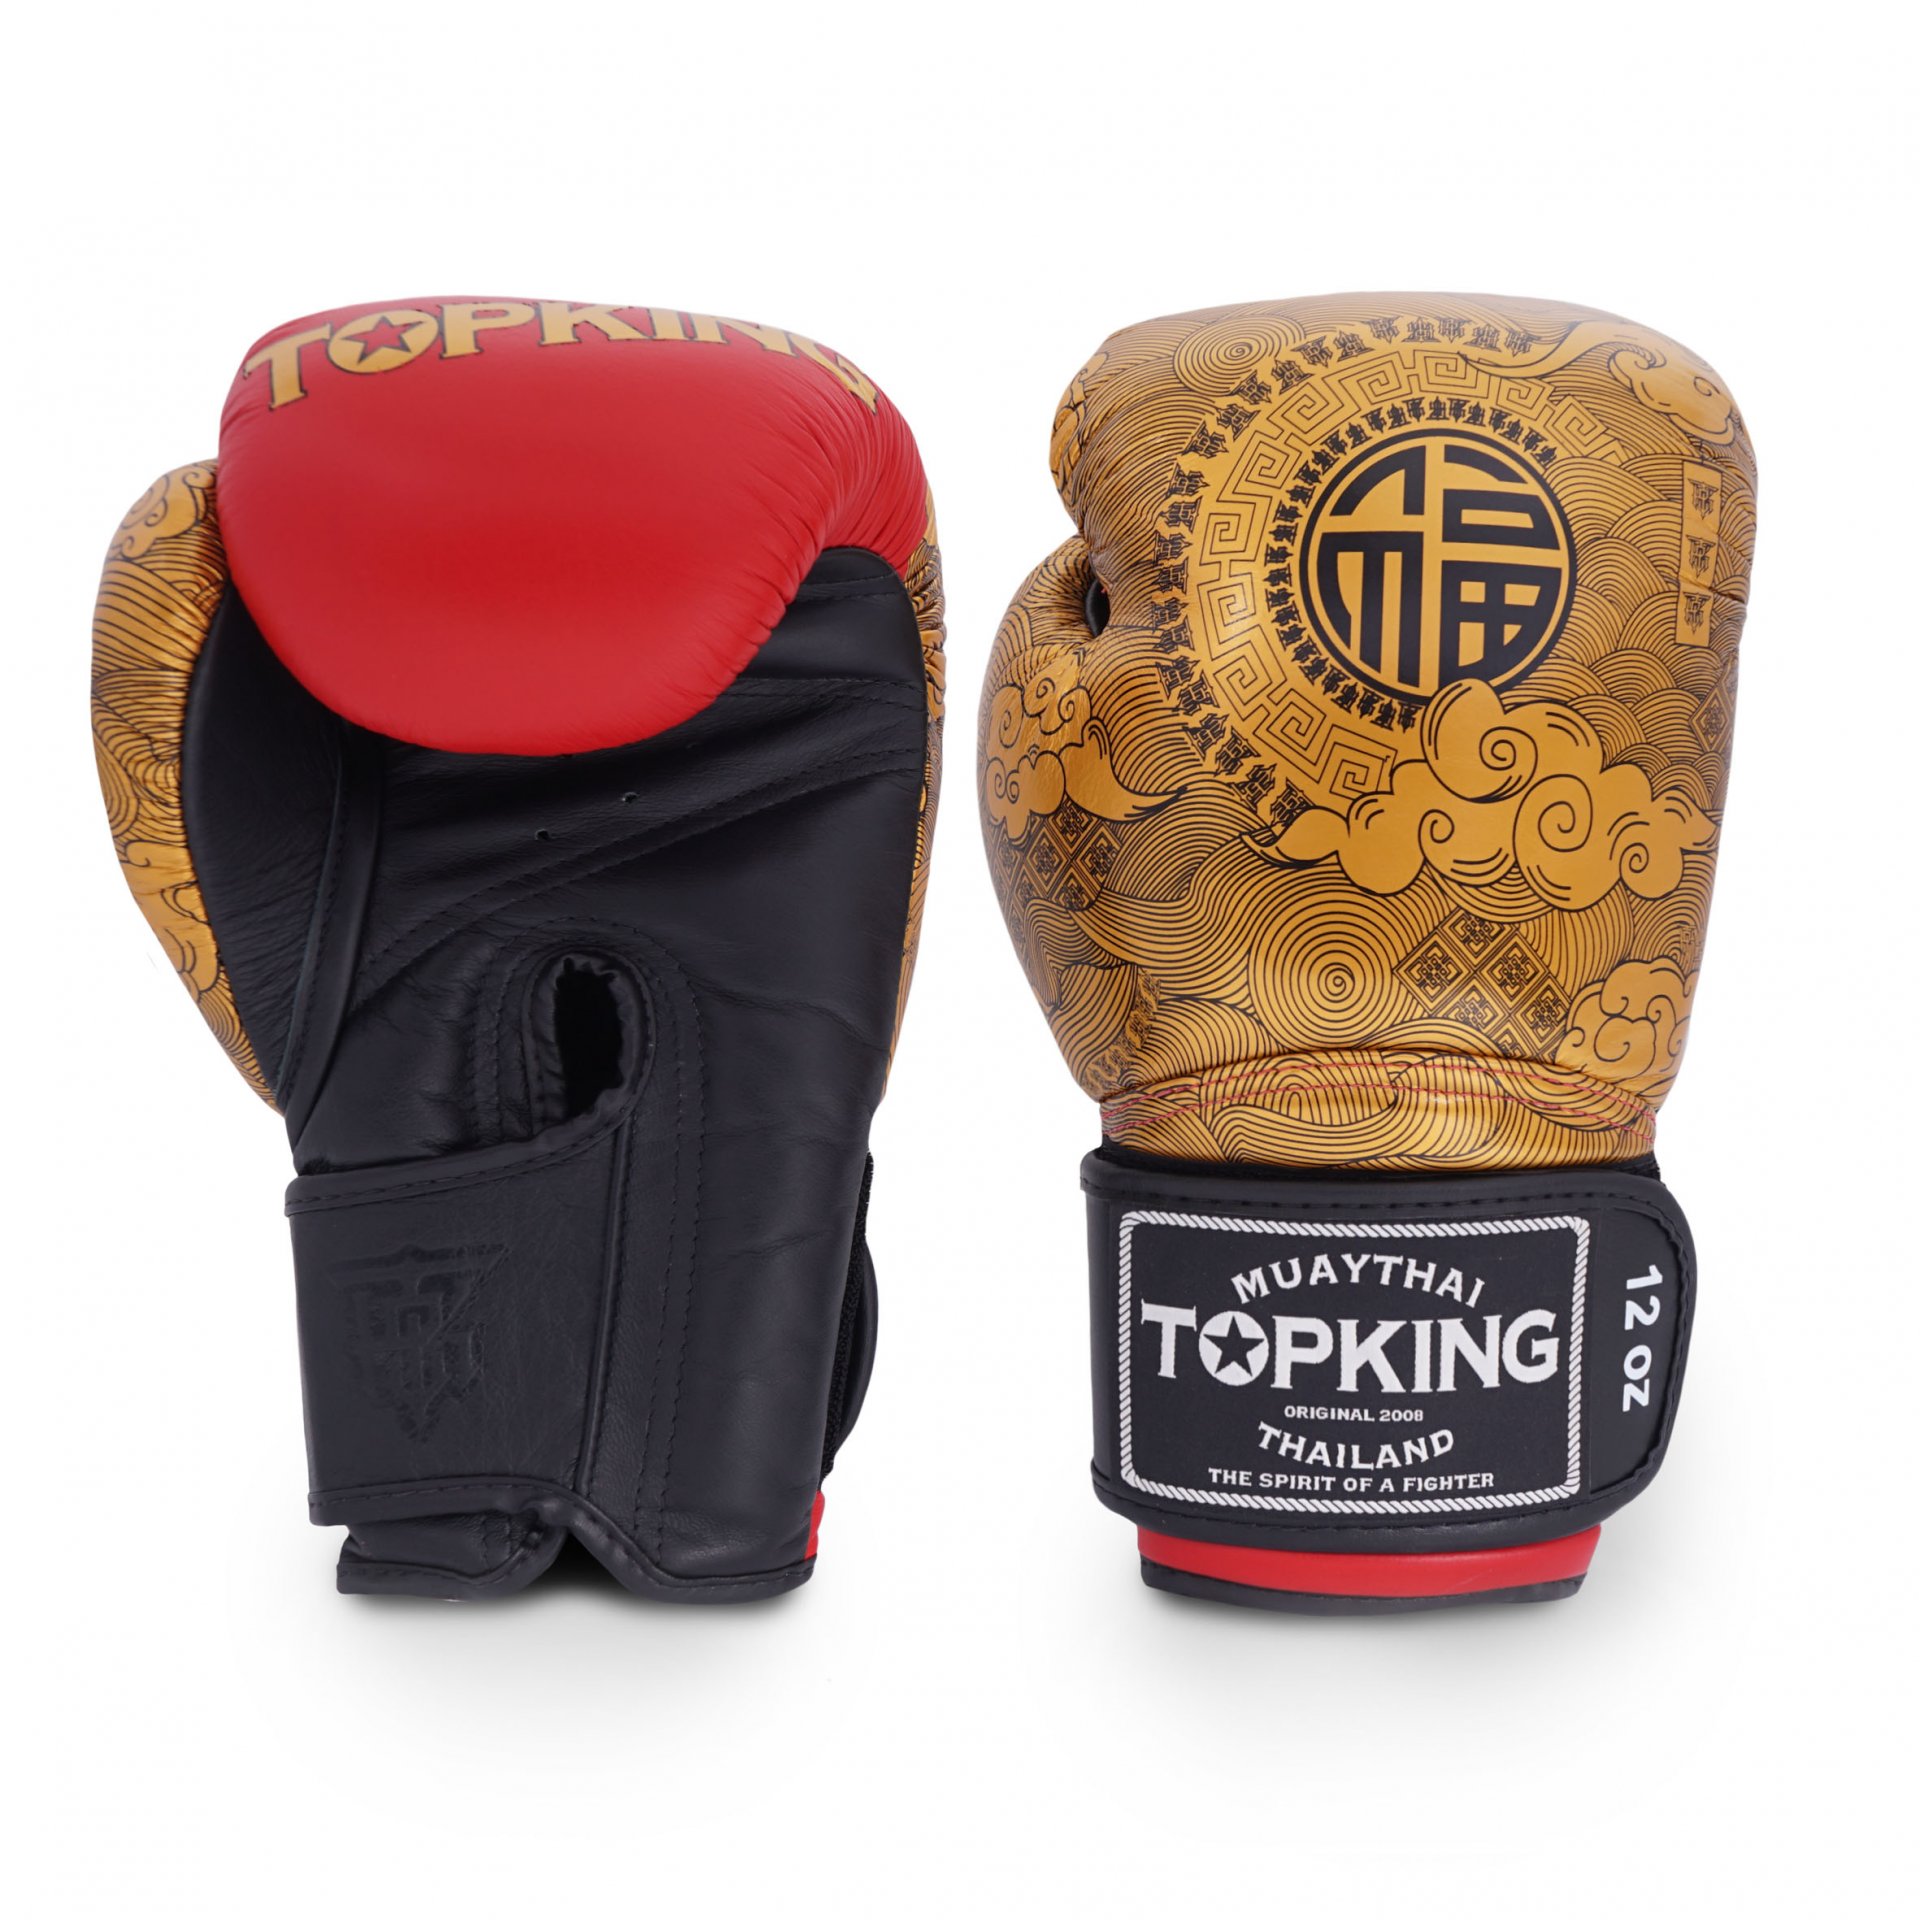 TOPKING GLOVES HAPPINESS CHINESE